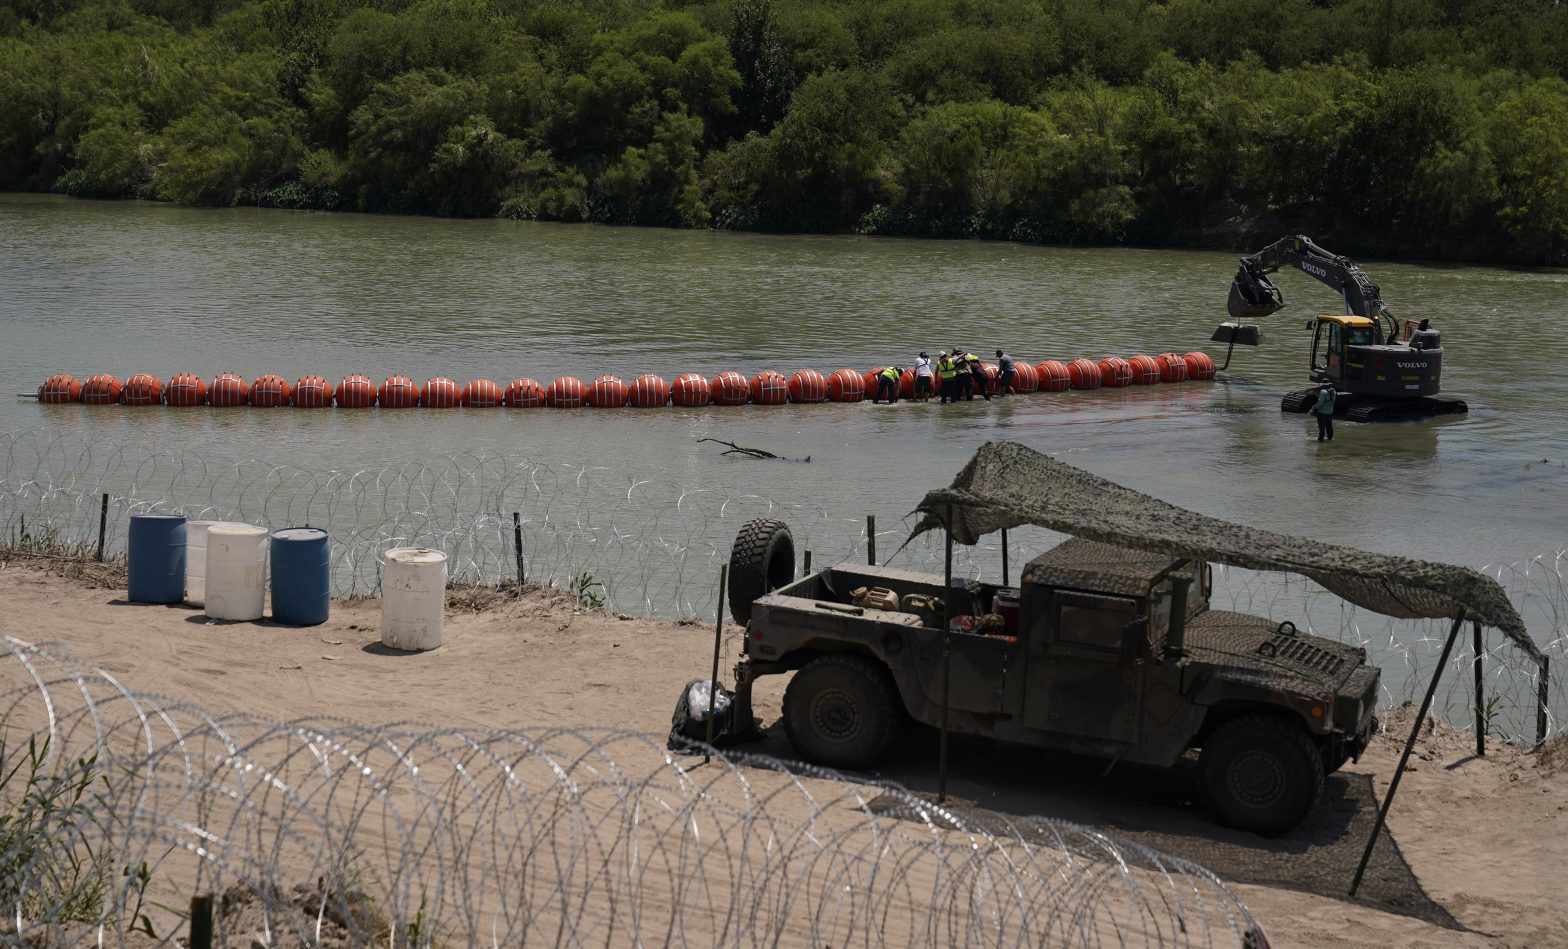 Biden Administration Sues Abbott Over Rio Grande Buoy Barrier Meant to Stop Migrants